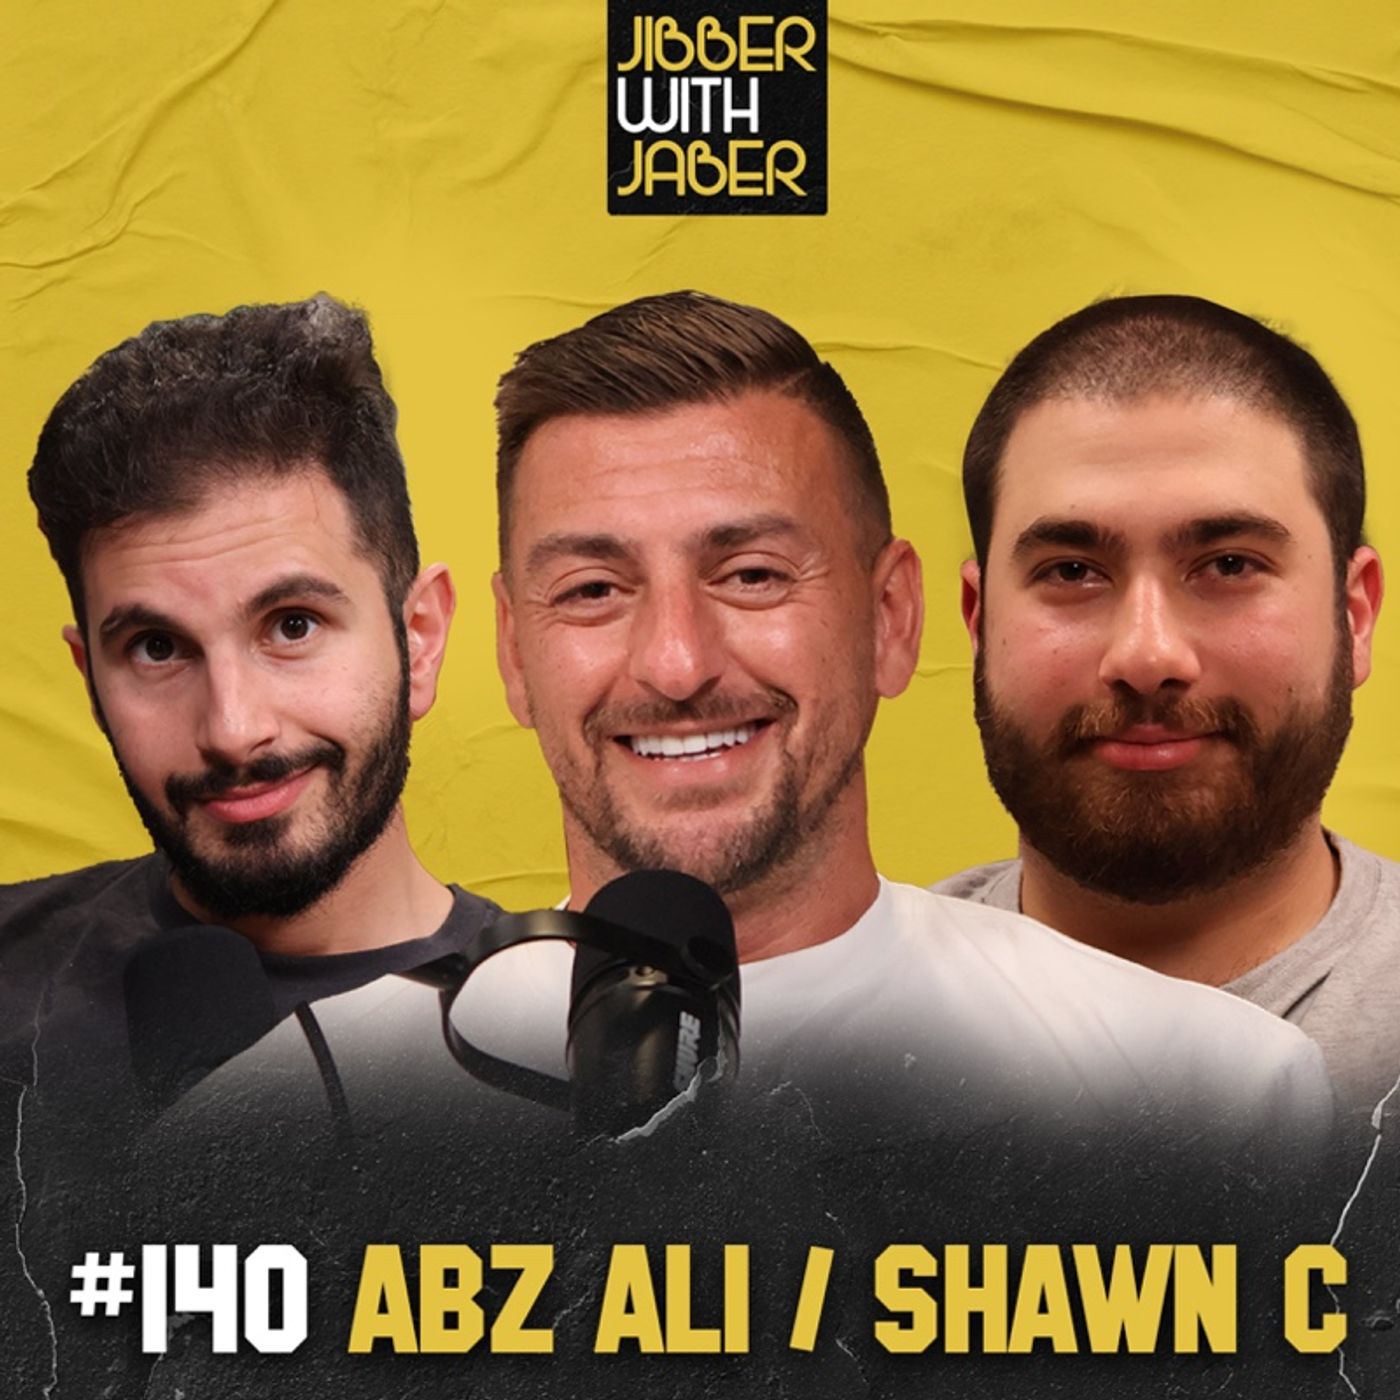 Abz Ali, Shawn C | Absurd comedians | EP140 Jibber with Jaber